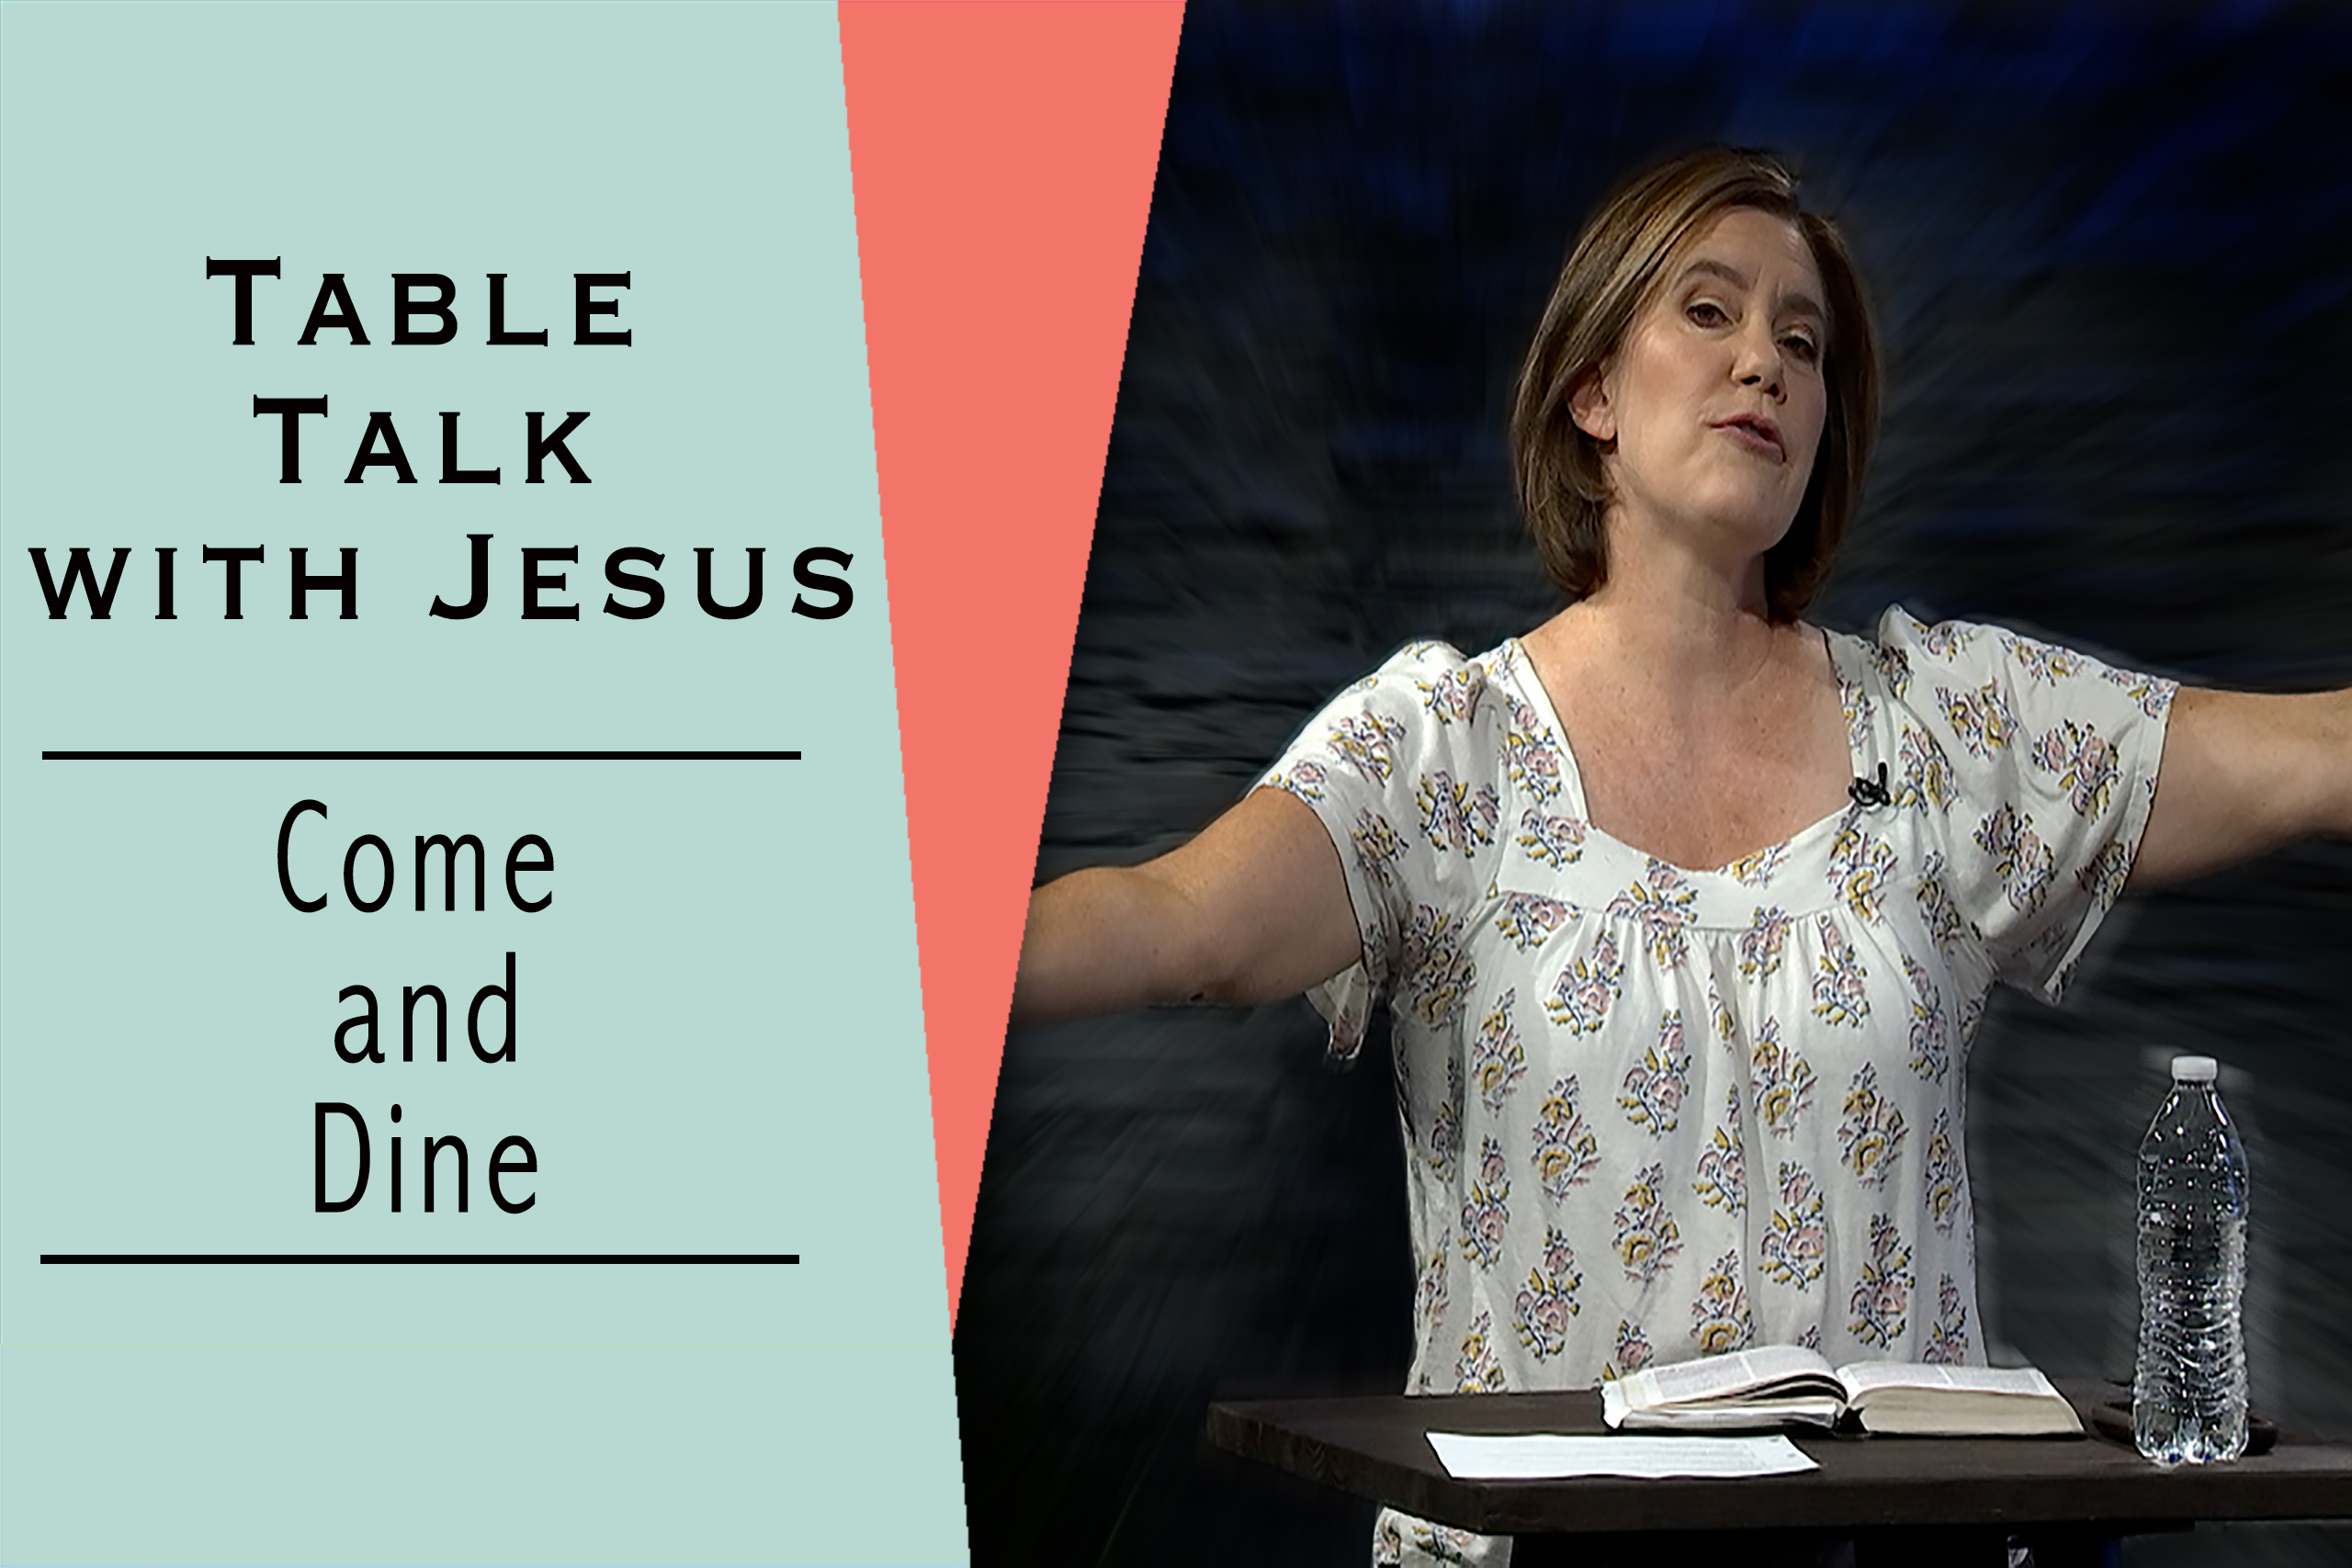 Table Talk with Jesus: Come and Dine - Sarah Bowling